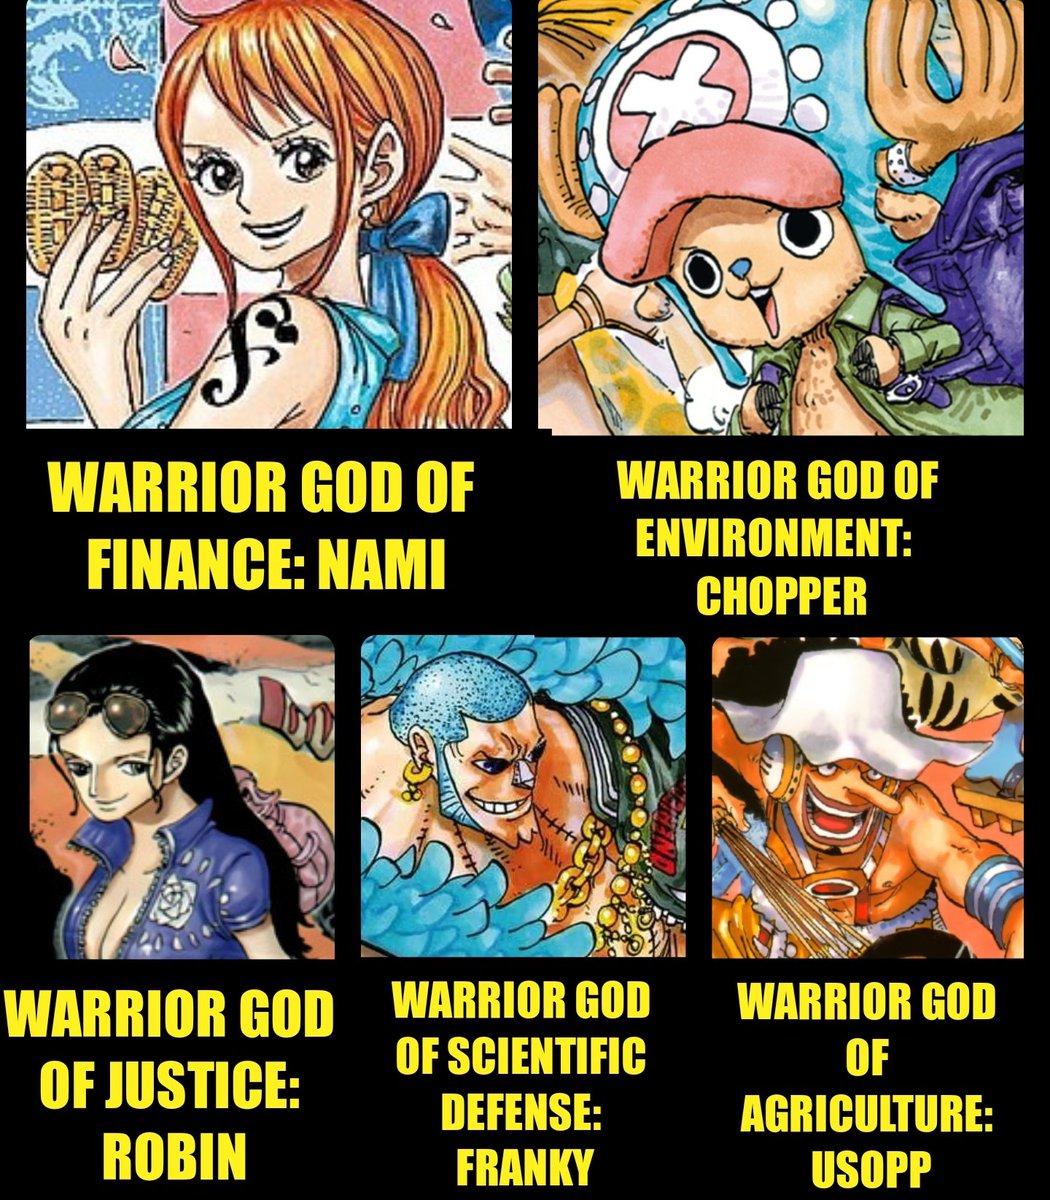 #ONEPIECE

What if the Strawhats became the Gorosei?